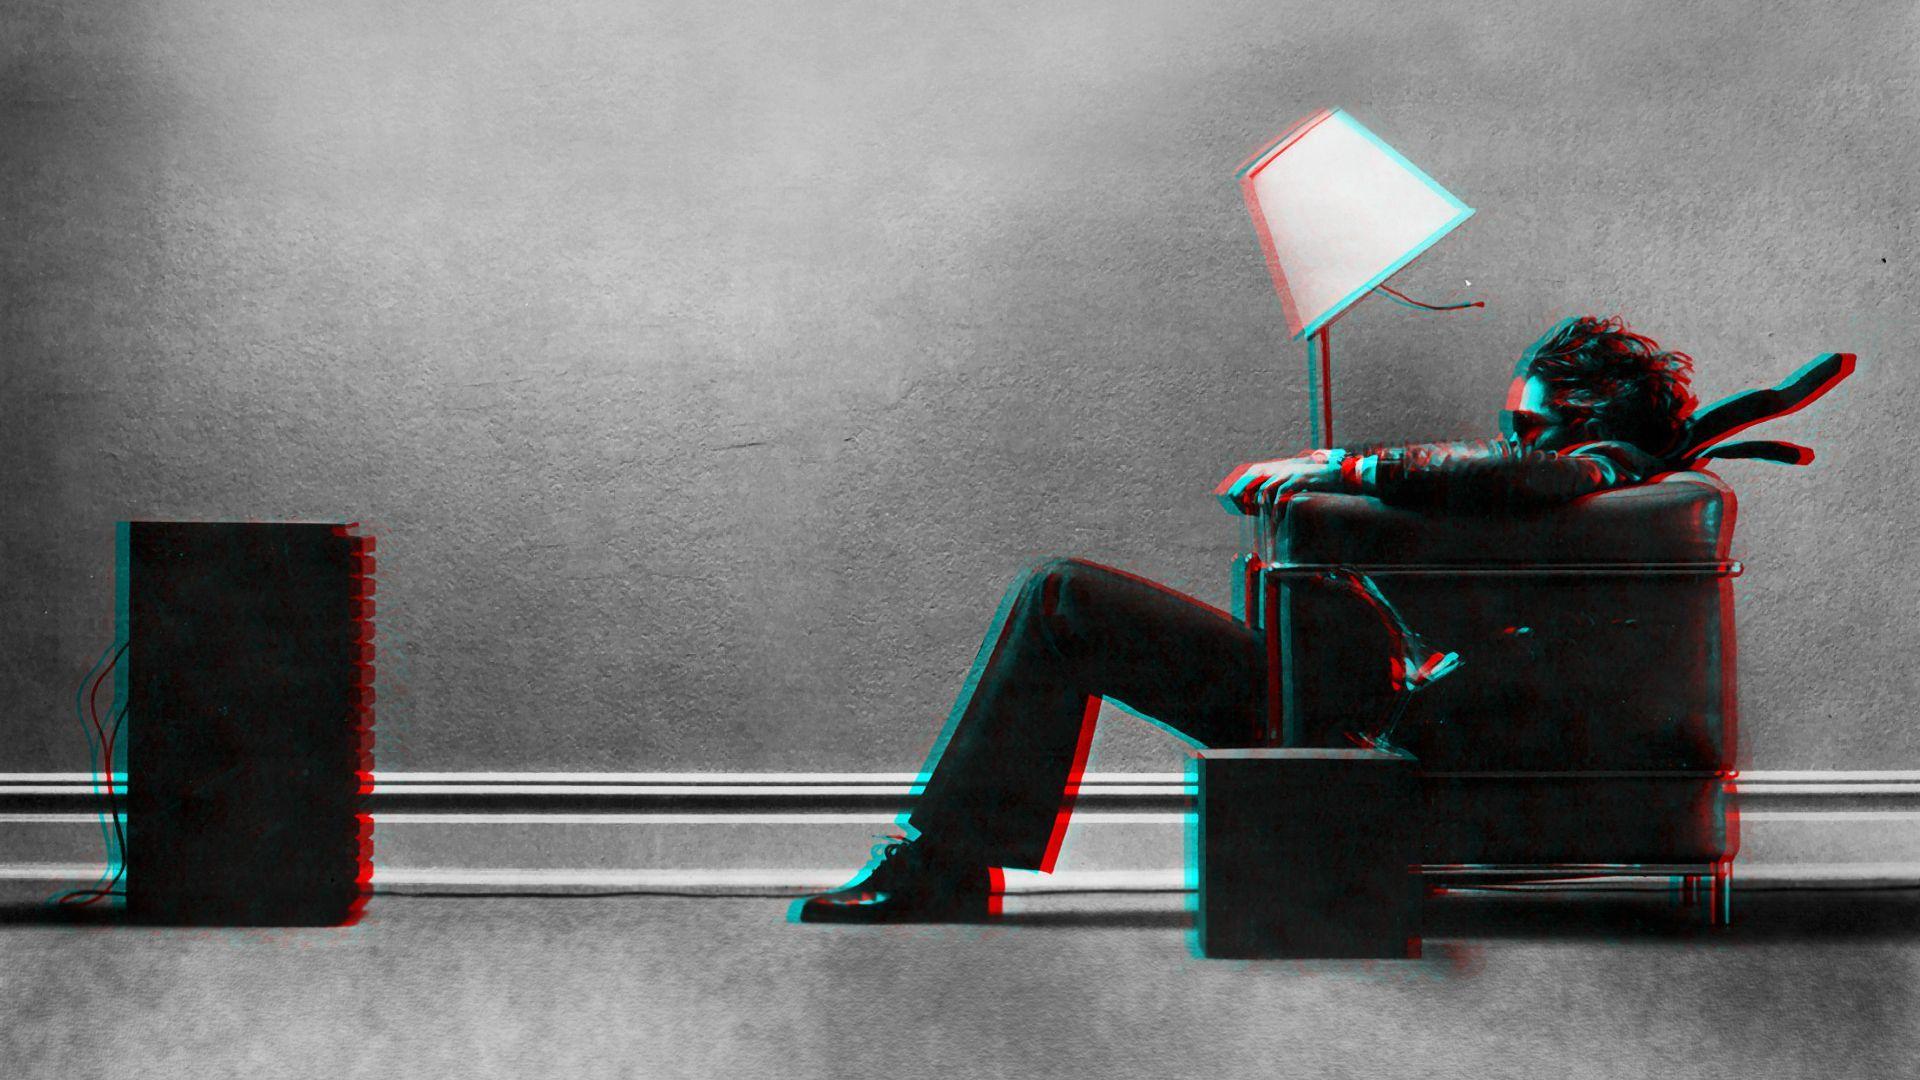 I added a 3D effect to the maxell wallpaper [1920x1080]